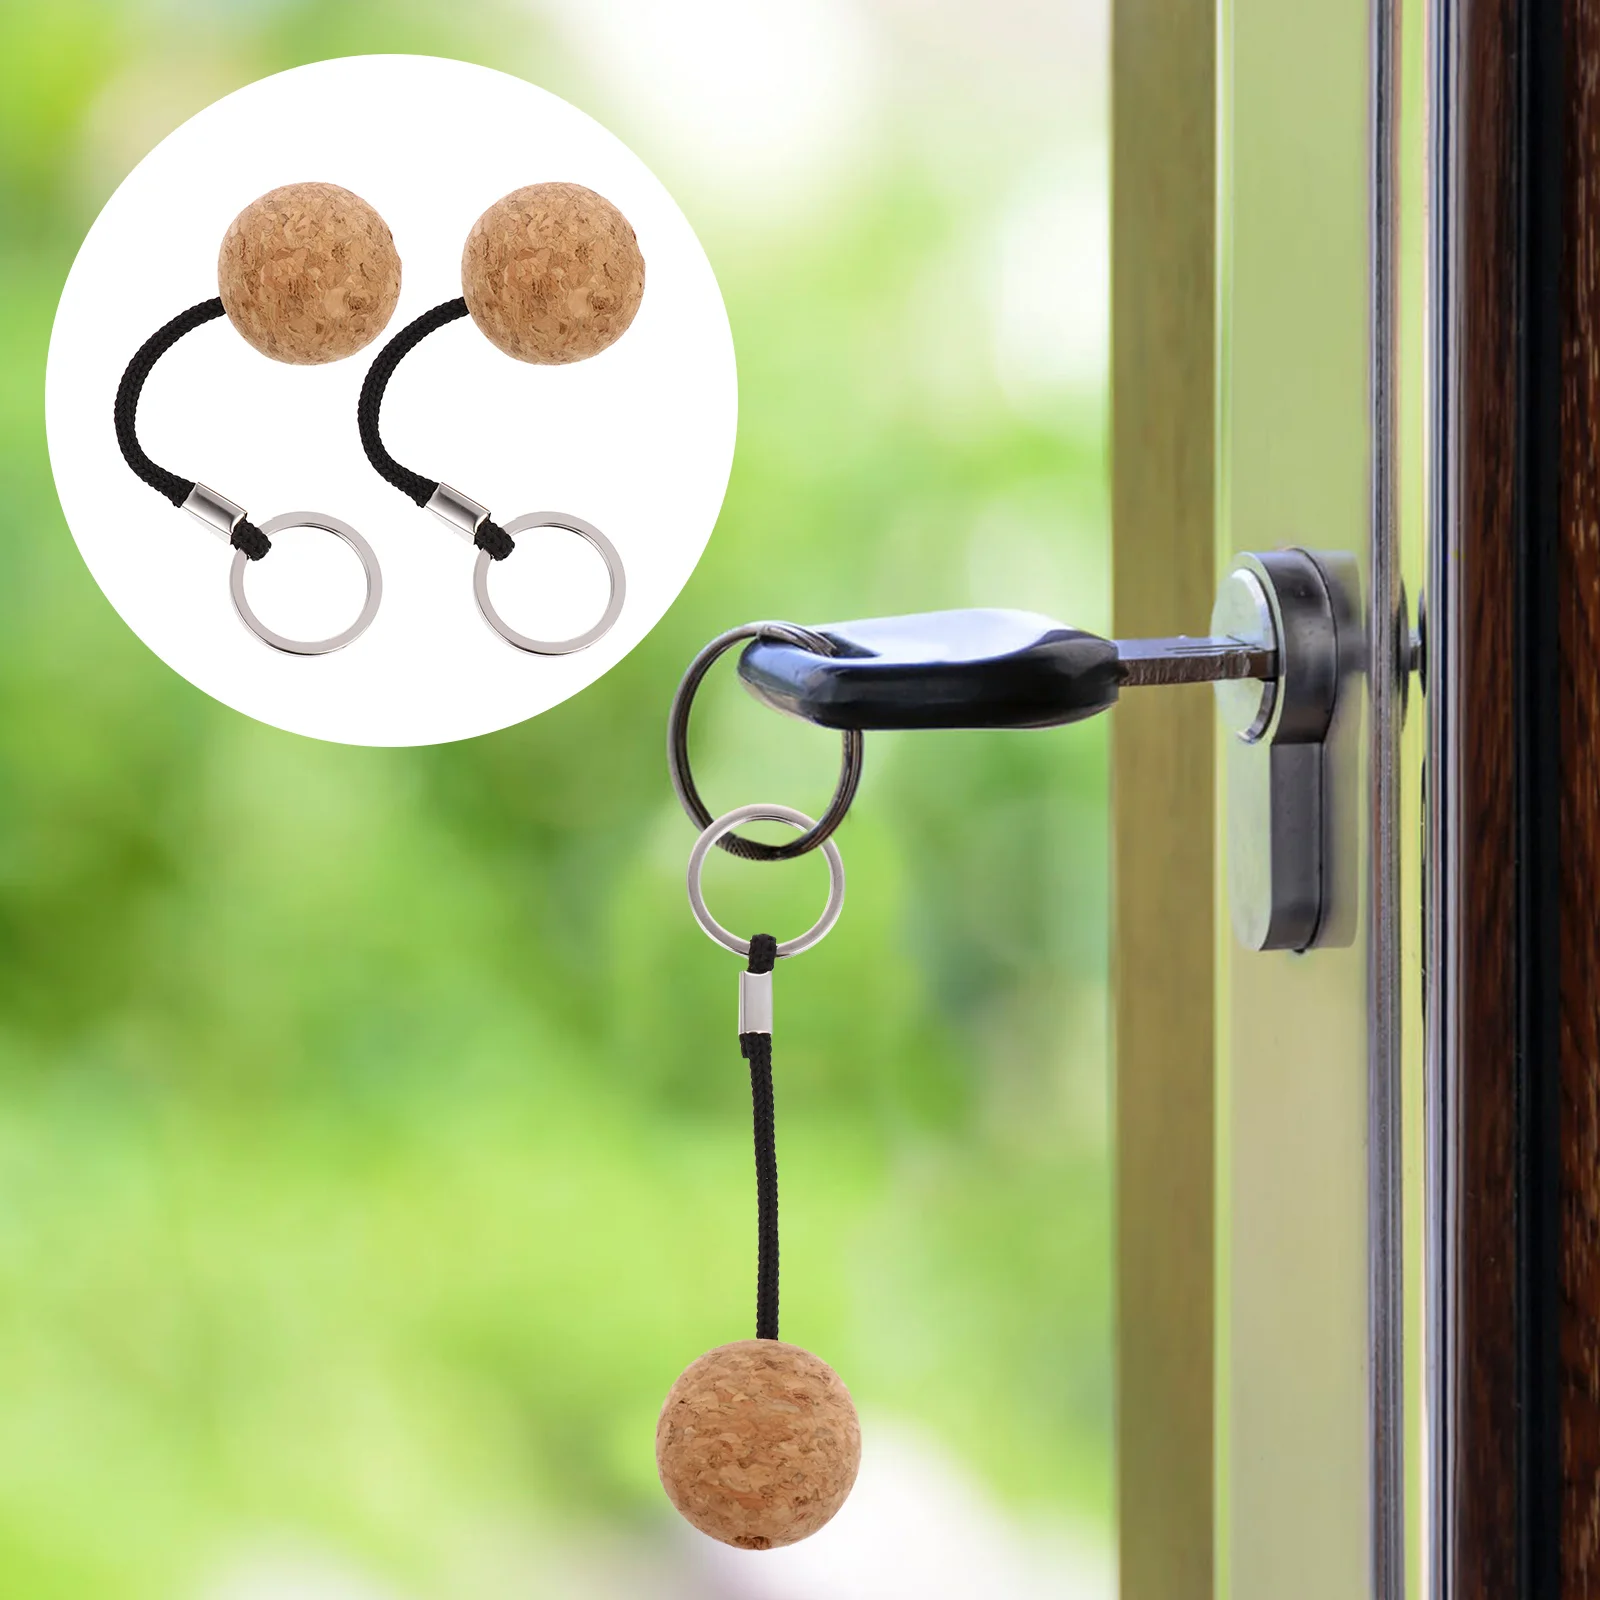 

2 Pcs Cork Float Ball Keyring Floating Chain Circle Sports Keychain Floatable Wooden Keys Marine accessories Boat